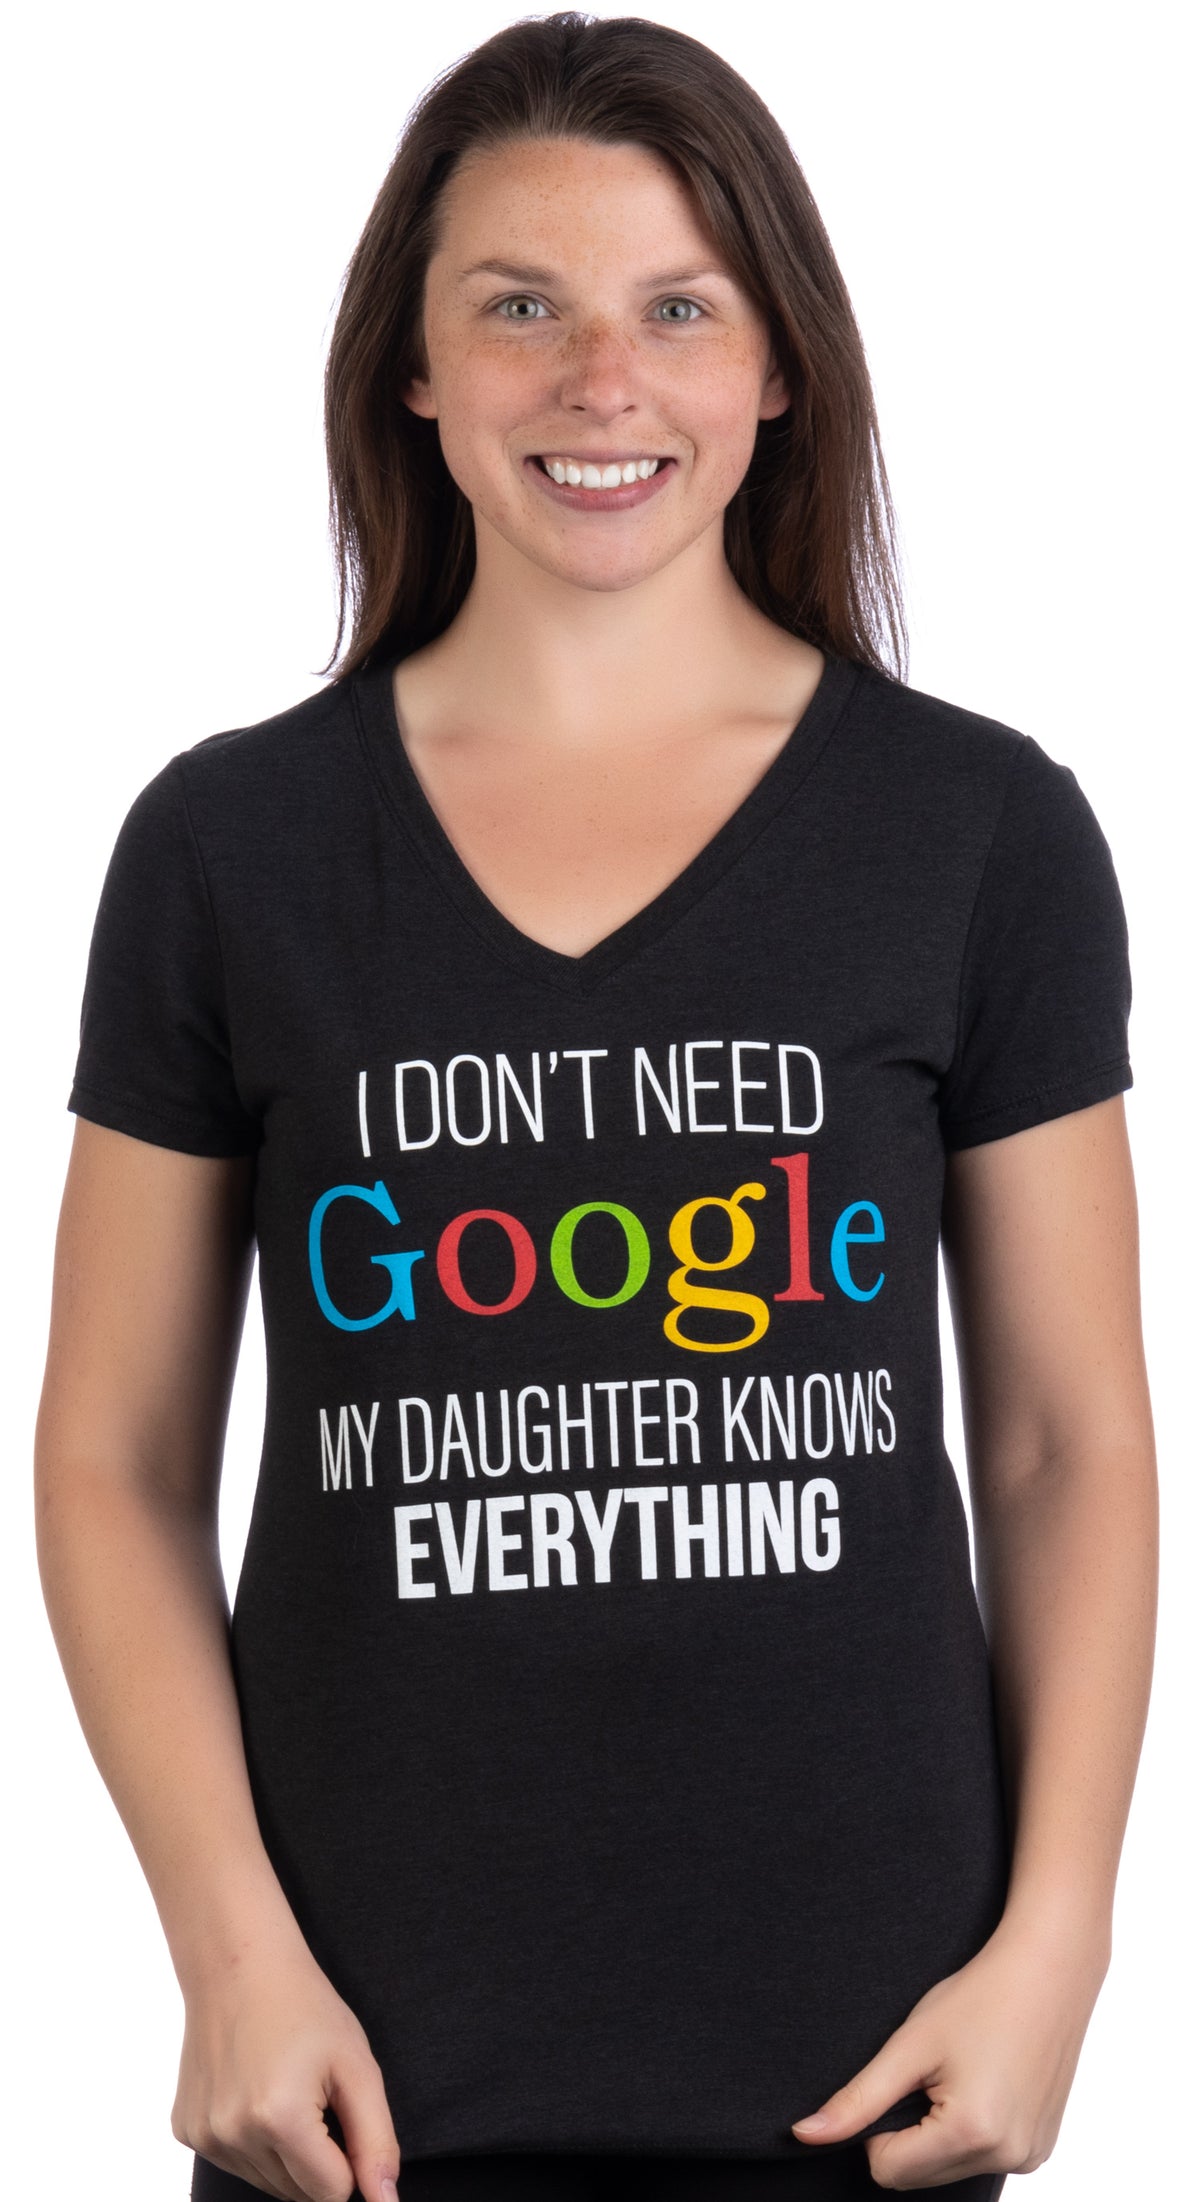 I Don't Need Google, My Daughter Knows Everything - Funny Dad Joke T-shirt